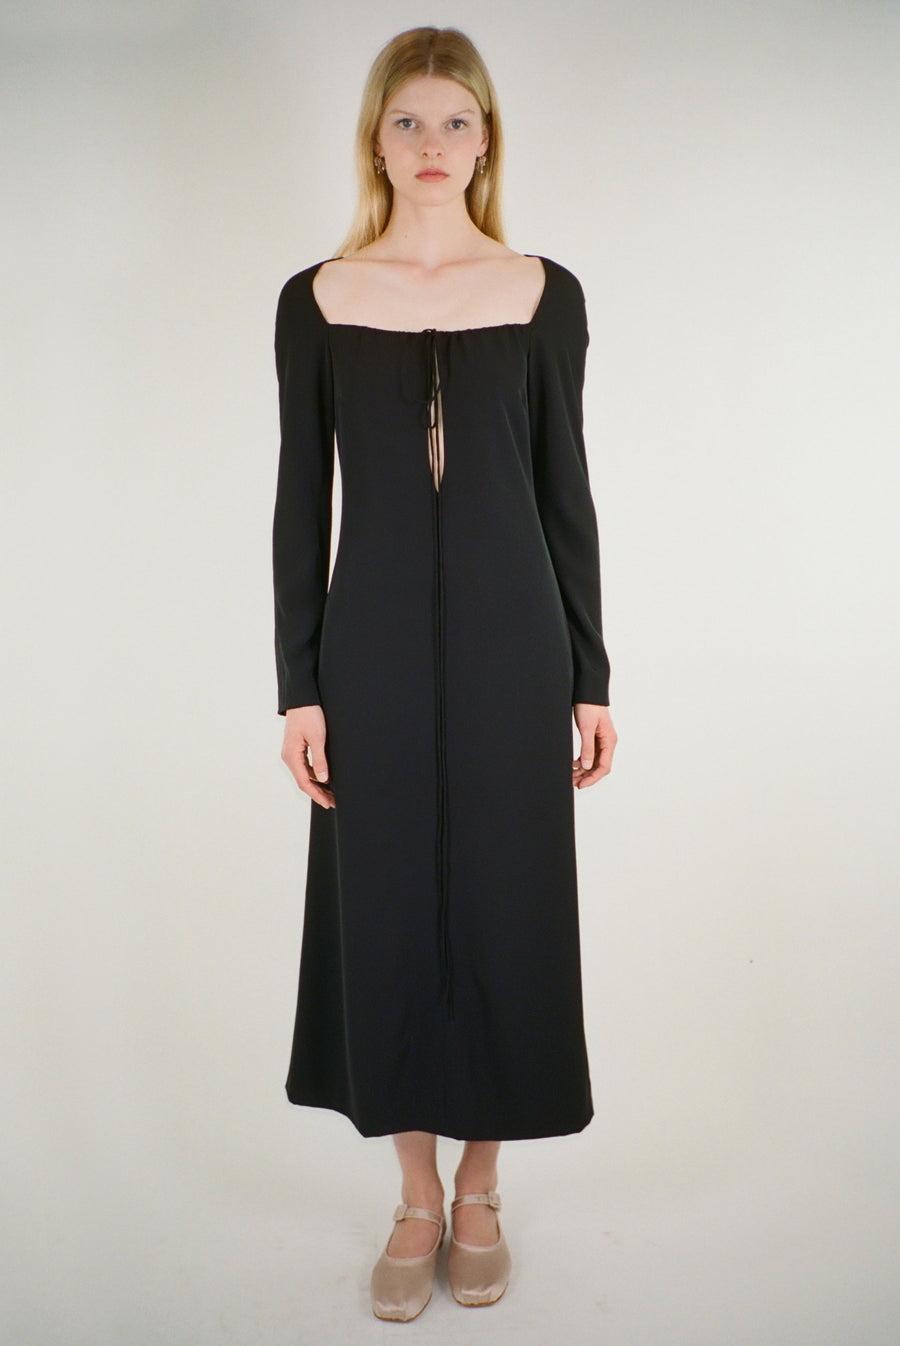 Long sleeve midi dress in black with open detail and tie on model